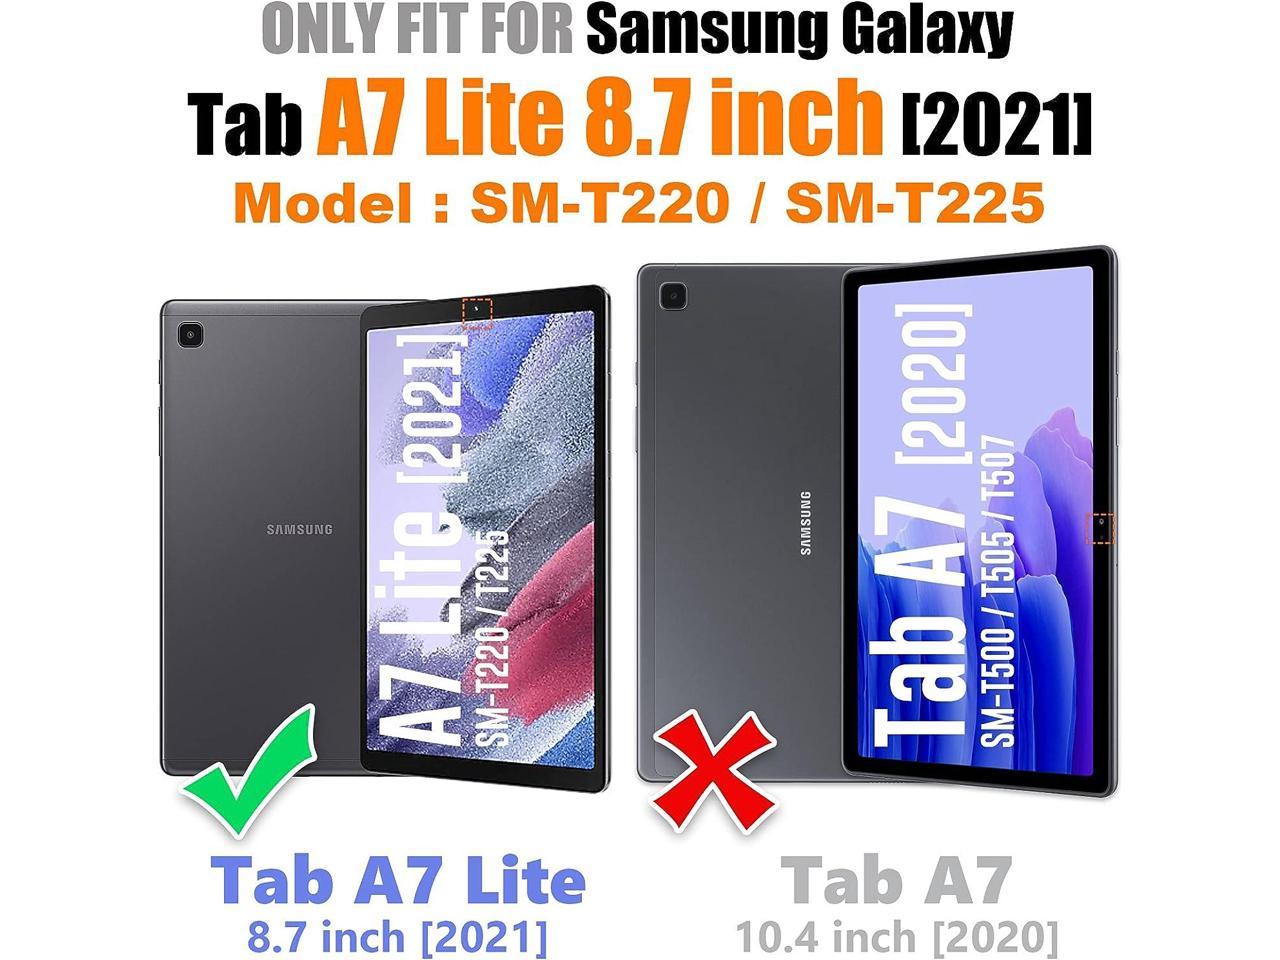 Shockproof Galaxy Tab A7 Lite Case for SM-T220/T225/T227 Black/Blue Screen Protector SEYMAC Samsung Galaxy Tab A7 Lite Case 8.7 Inch 2021 with Shoulder Strap Hand Strap 360 Rotating Stand 